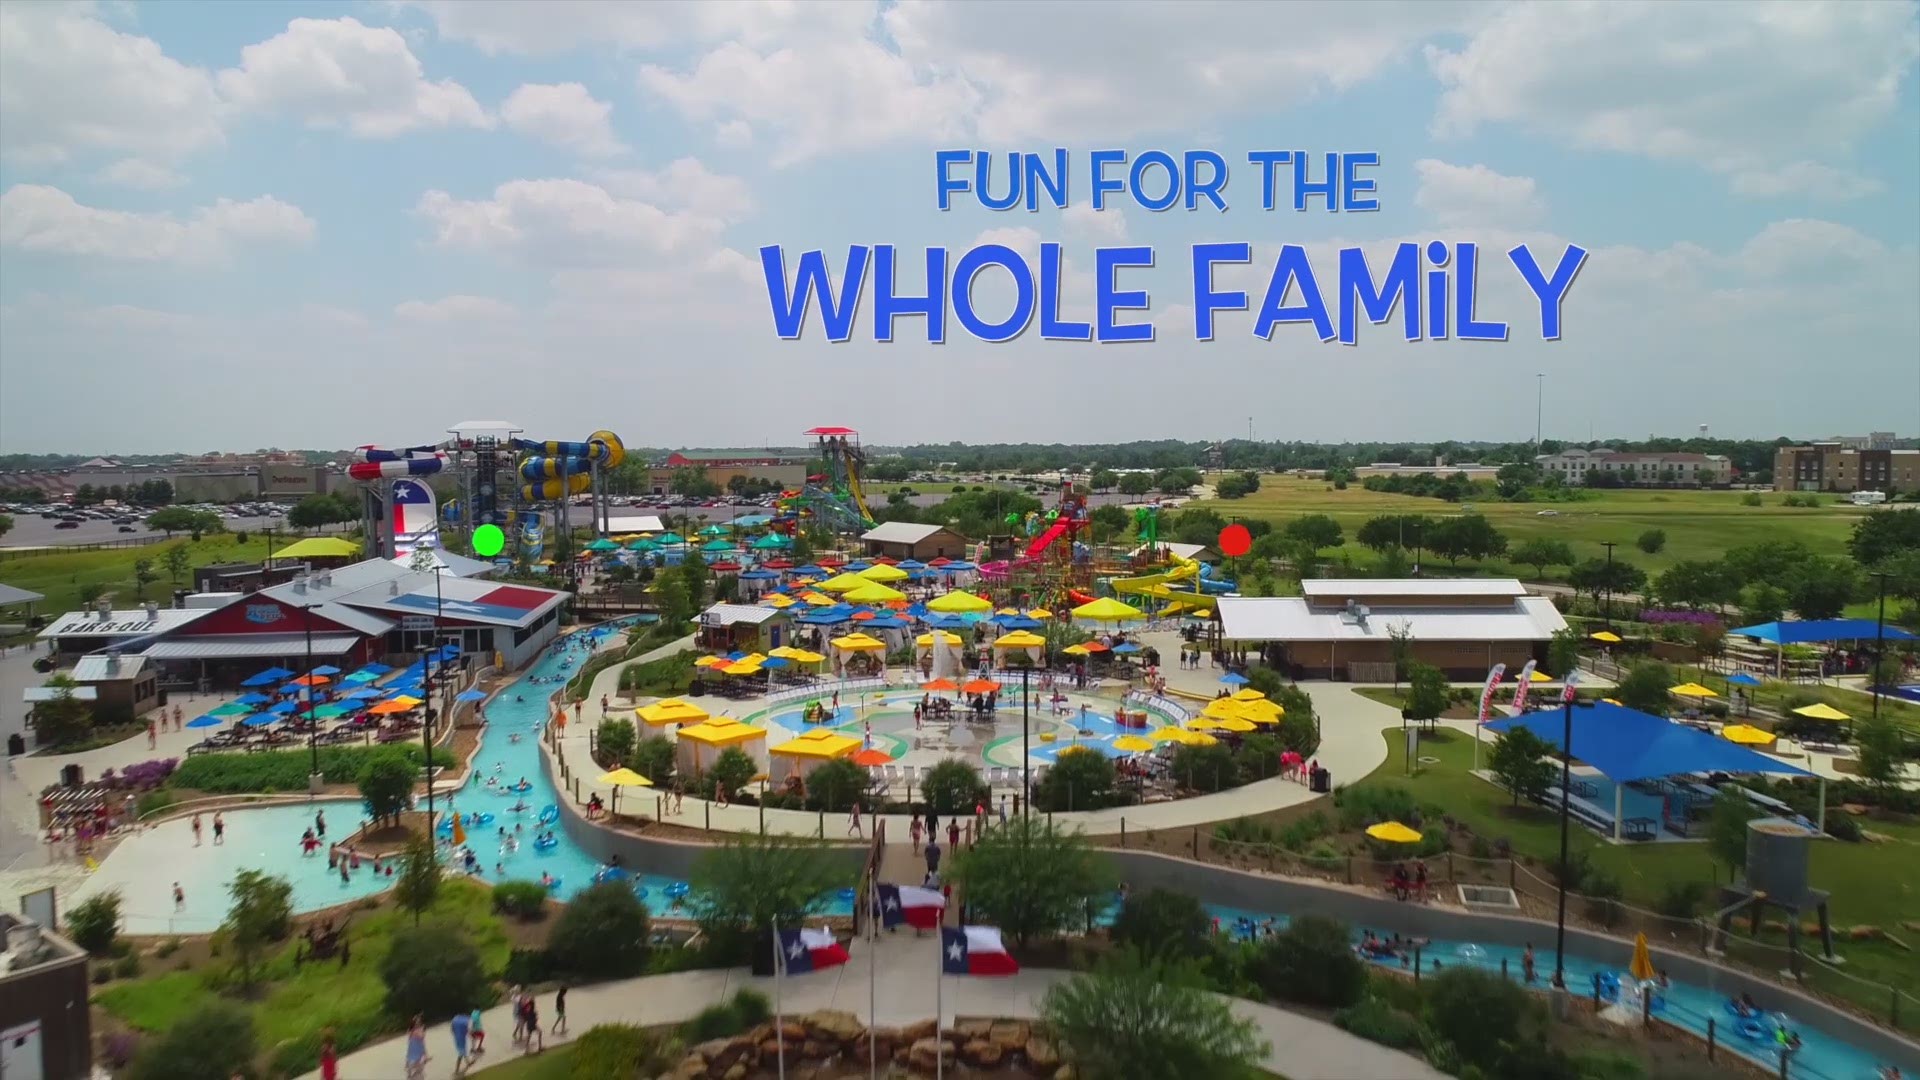 If you’re on the west side, head to Katy and make a splash at Typhoon Texas. 

This family-friendly water park is designed for people of all ages and promises GOOD. CLEAN. FUN.

Rides include The Twister, a raft ride that combines a waterslide with white water rafting, and The Duelin’ Daltons area, featuring five western-themed rides that will take your breath away.